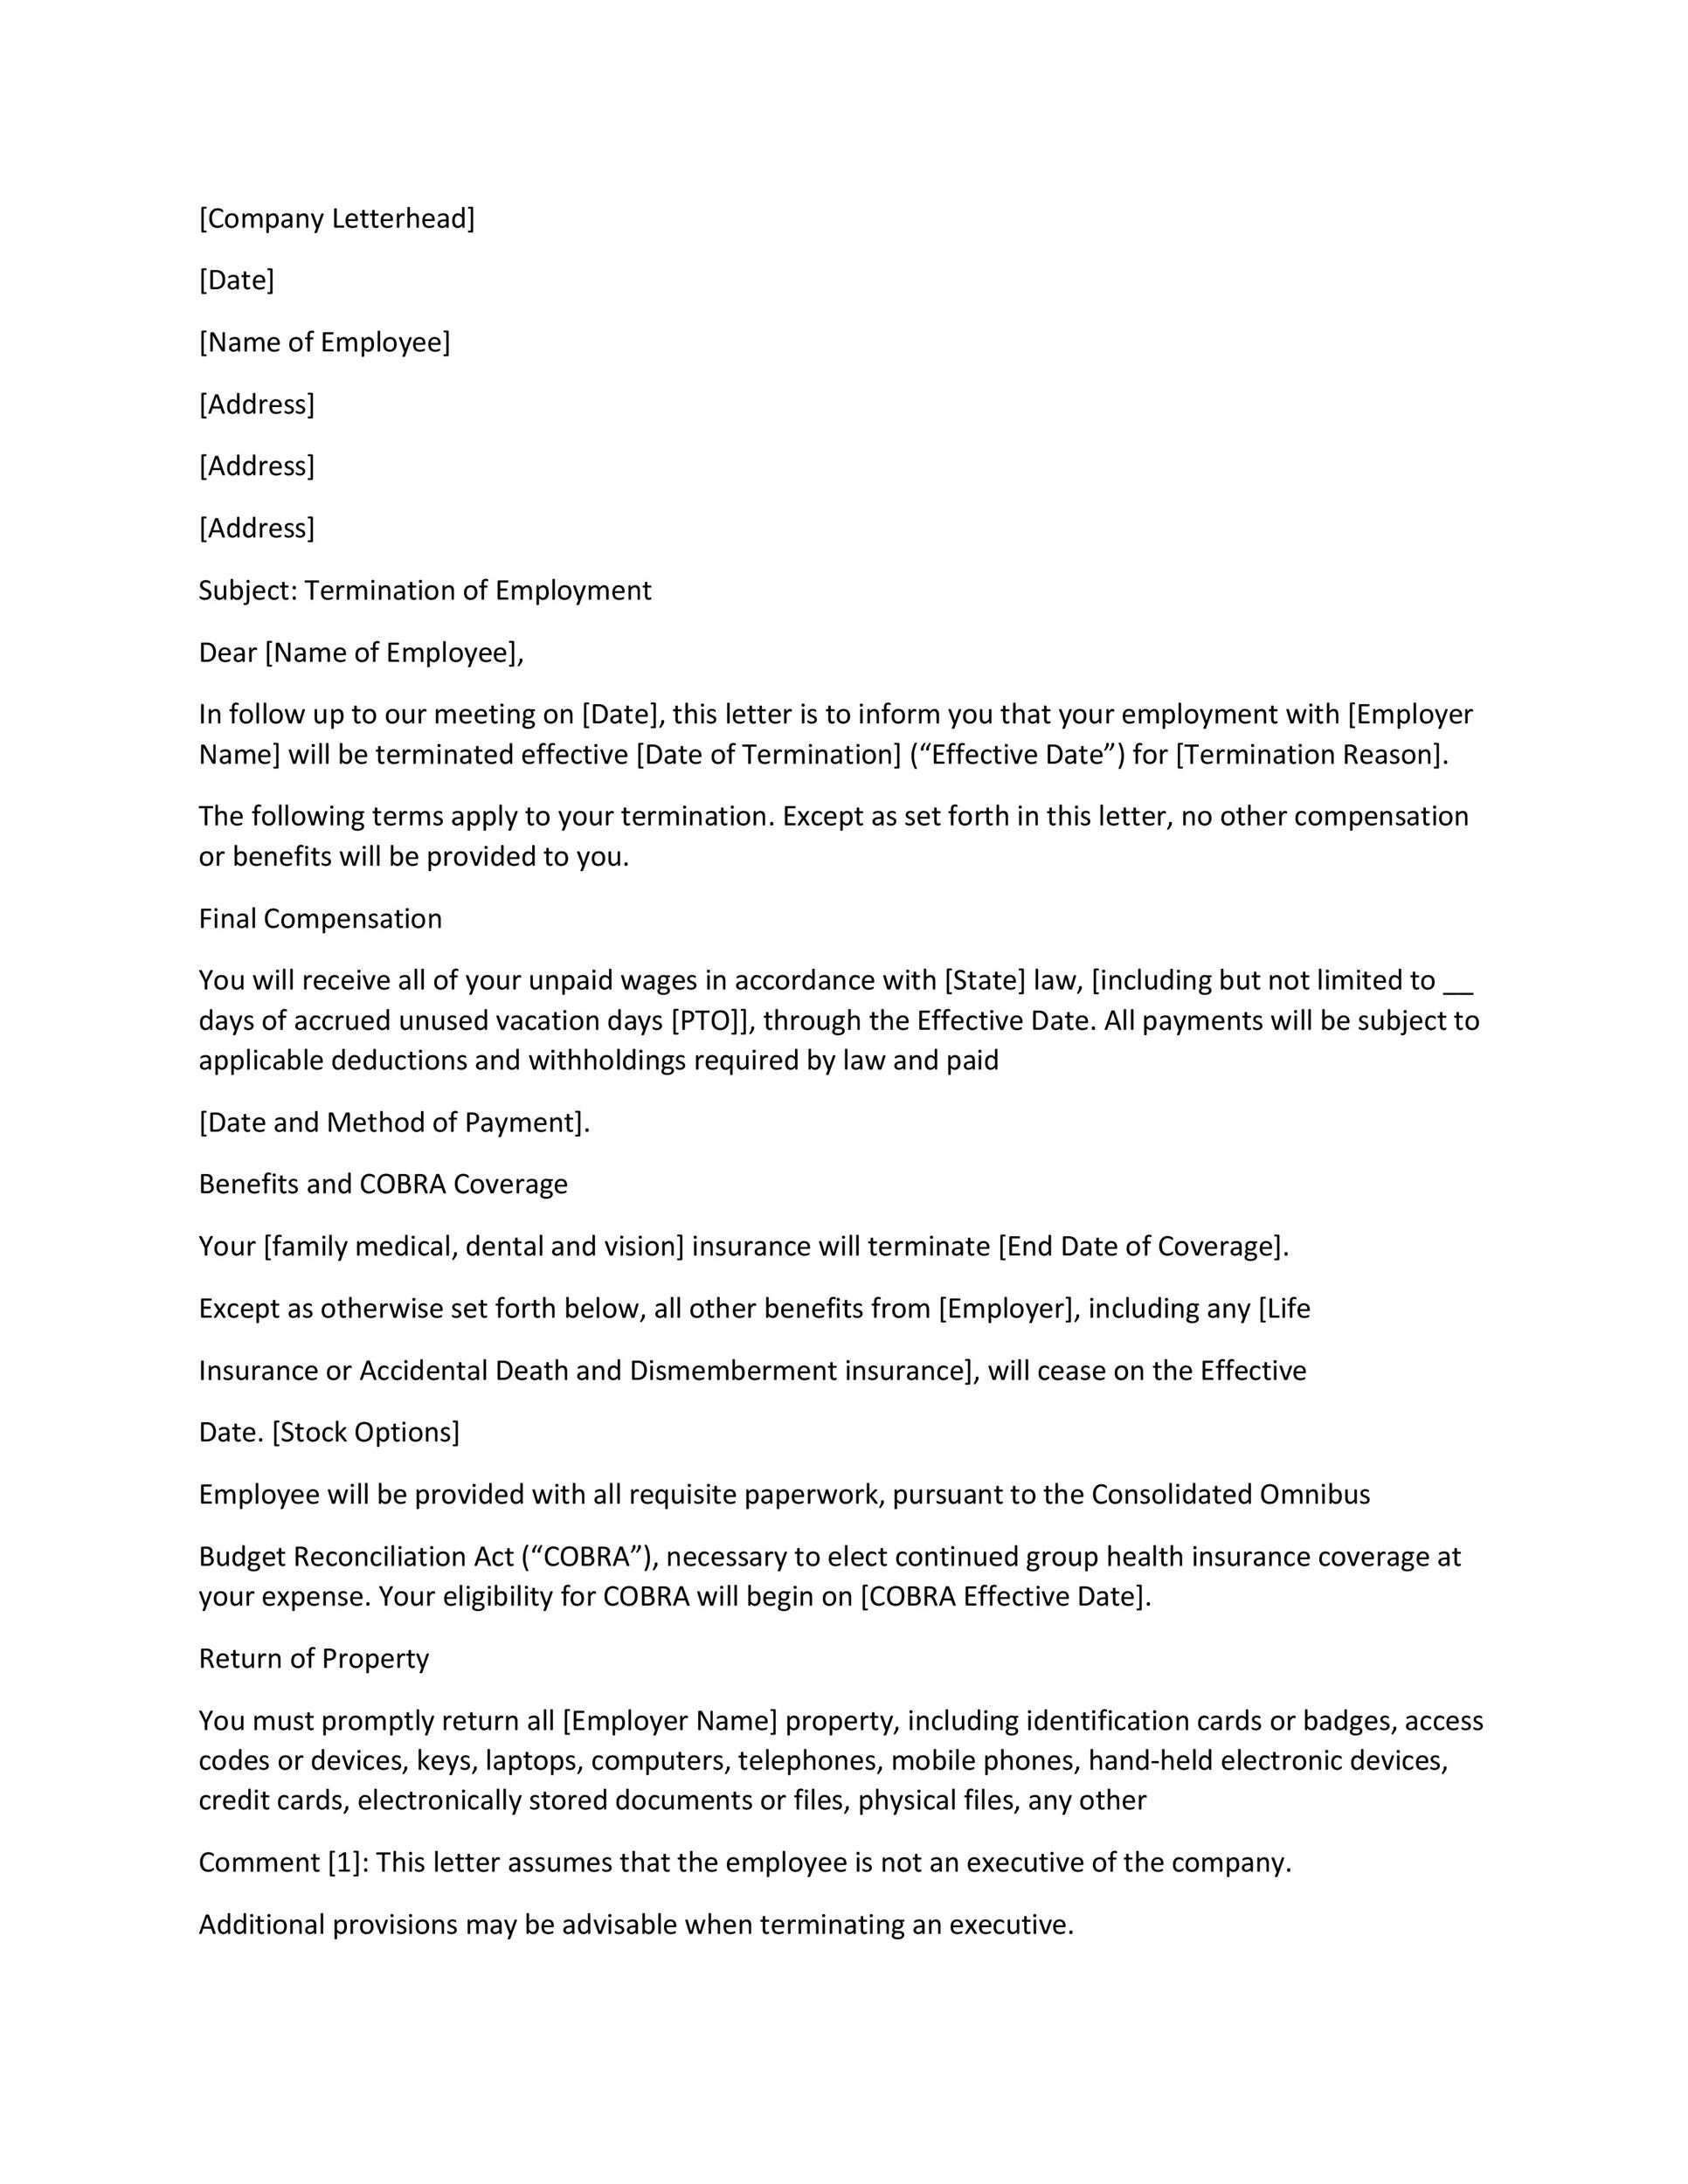 Employment Termination Letter Template Free from templatelab.com